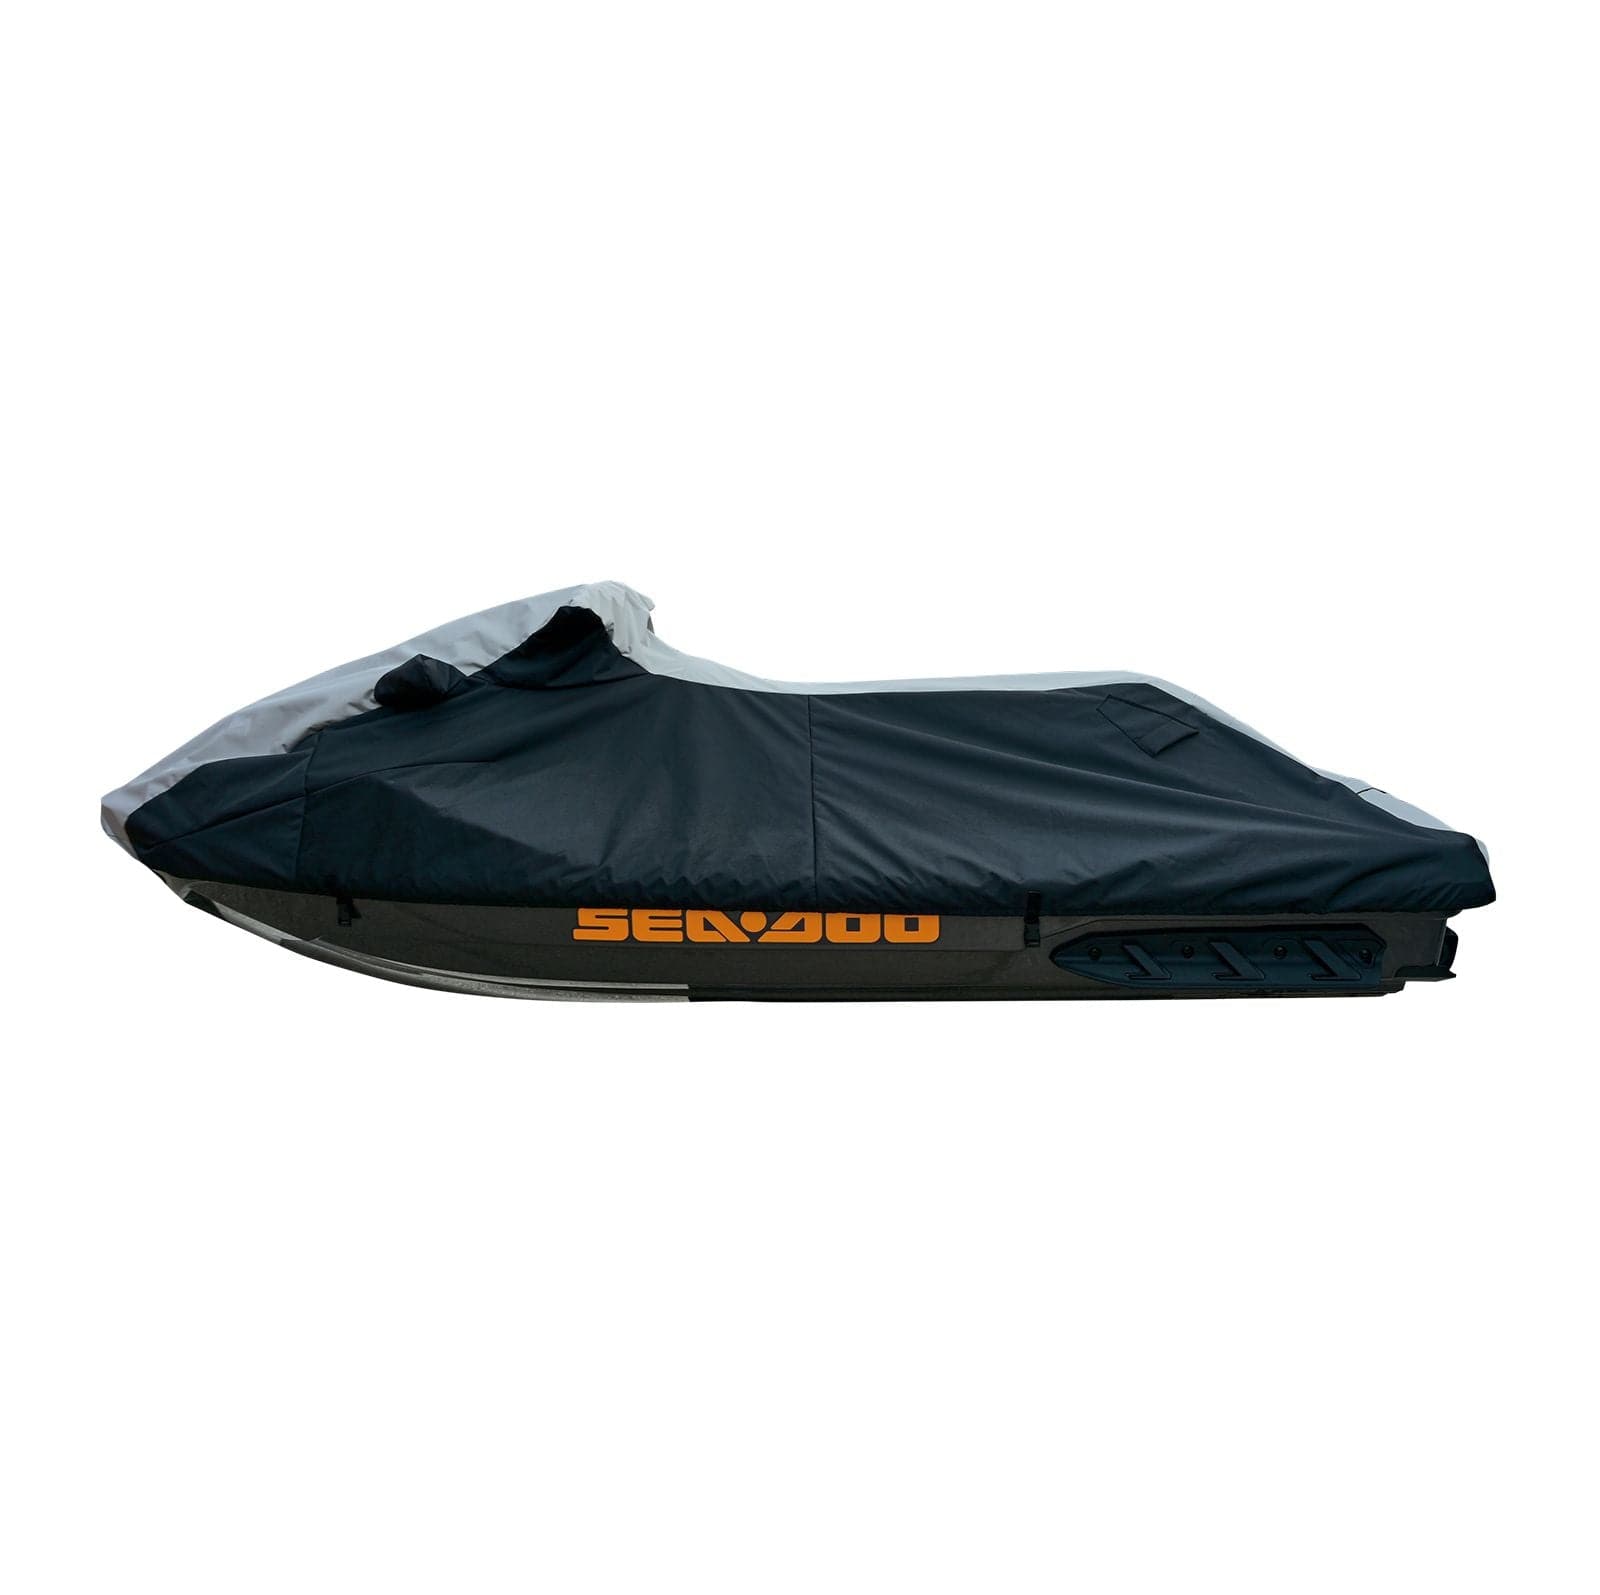 Trailerable Storage cover with vents for Yamaha 2005-2009  VX110 Sport W/O Mirrors